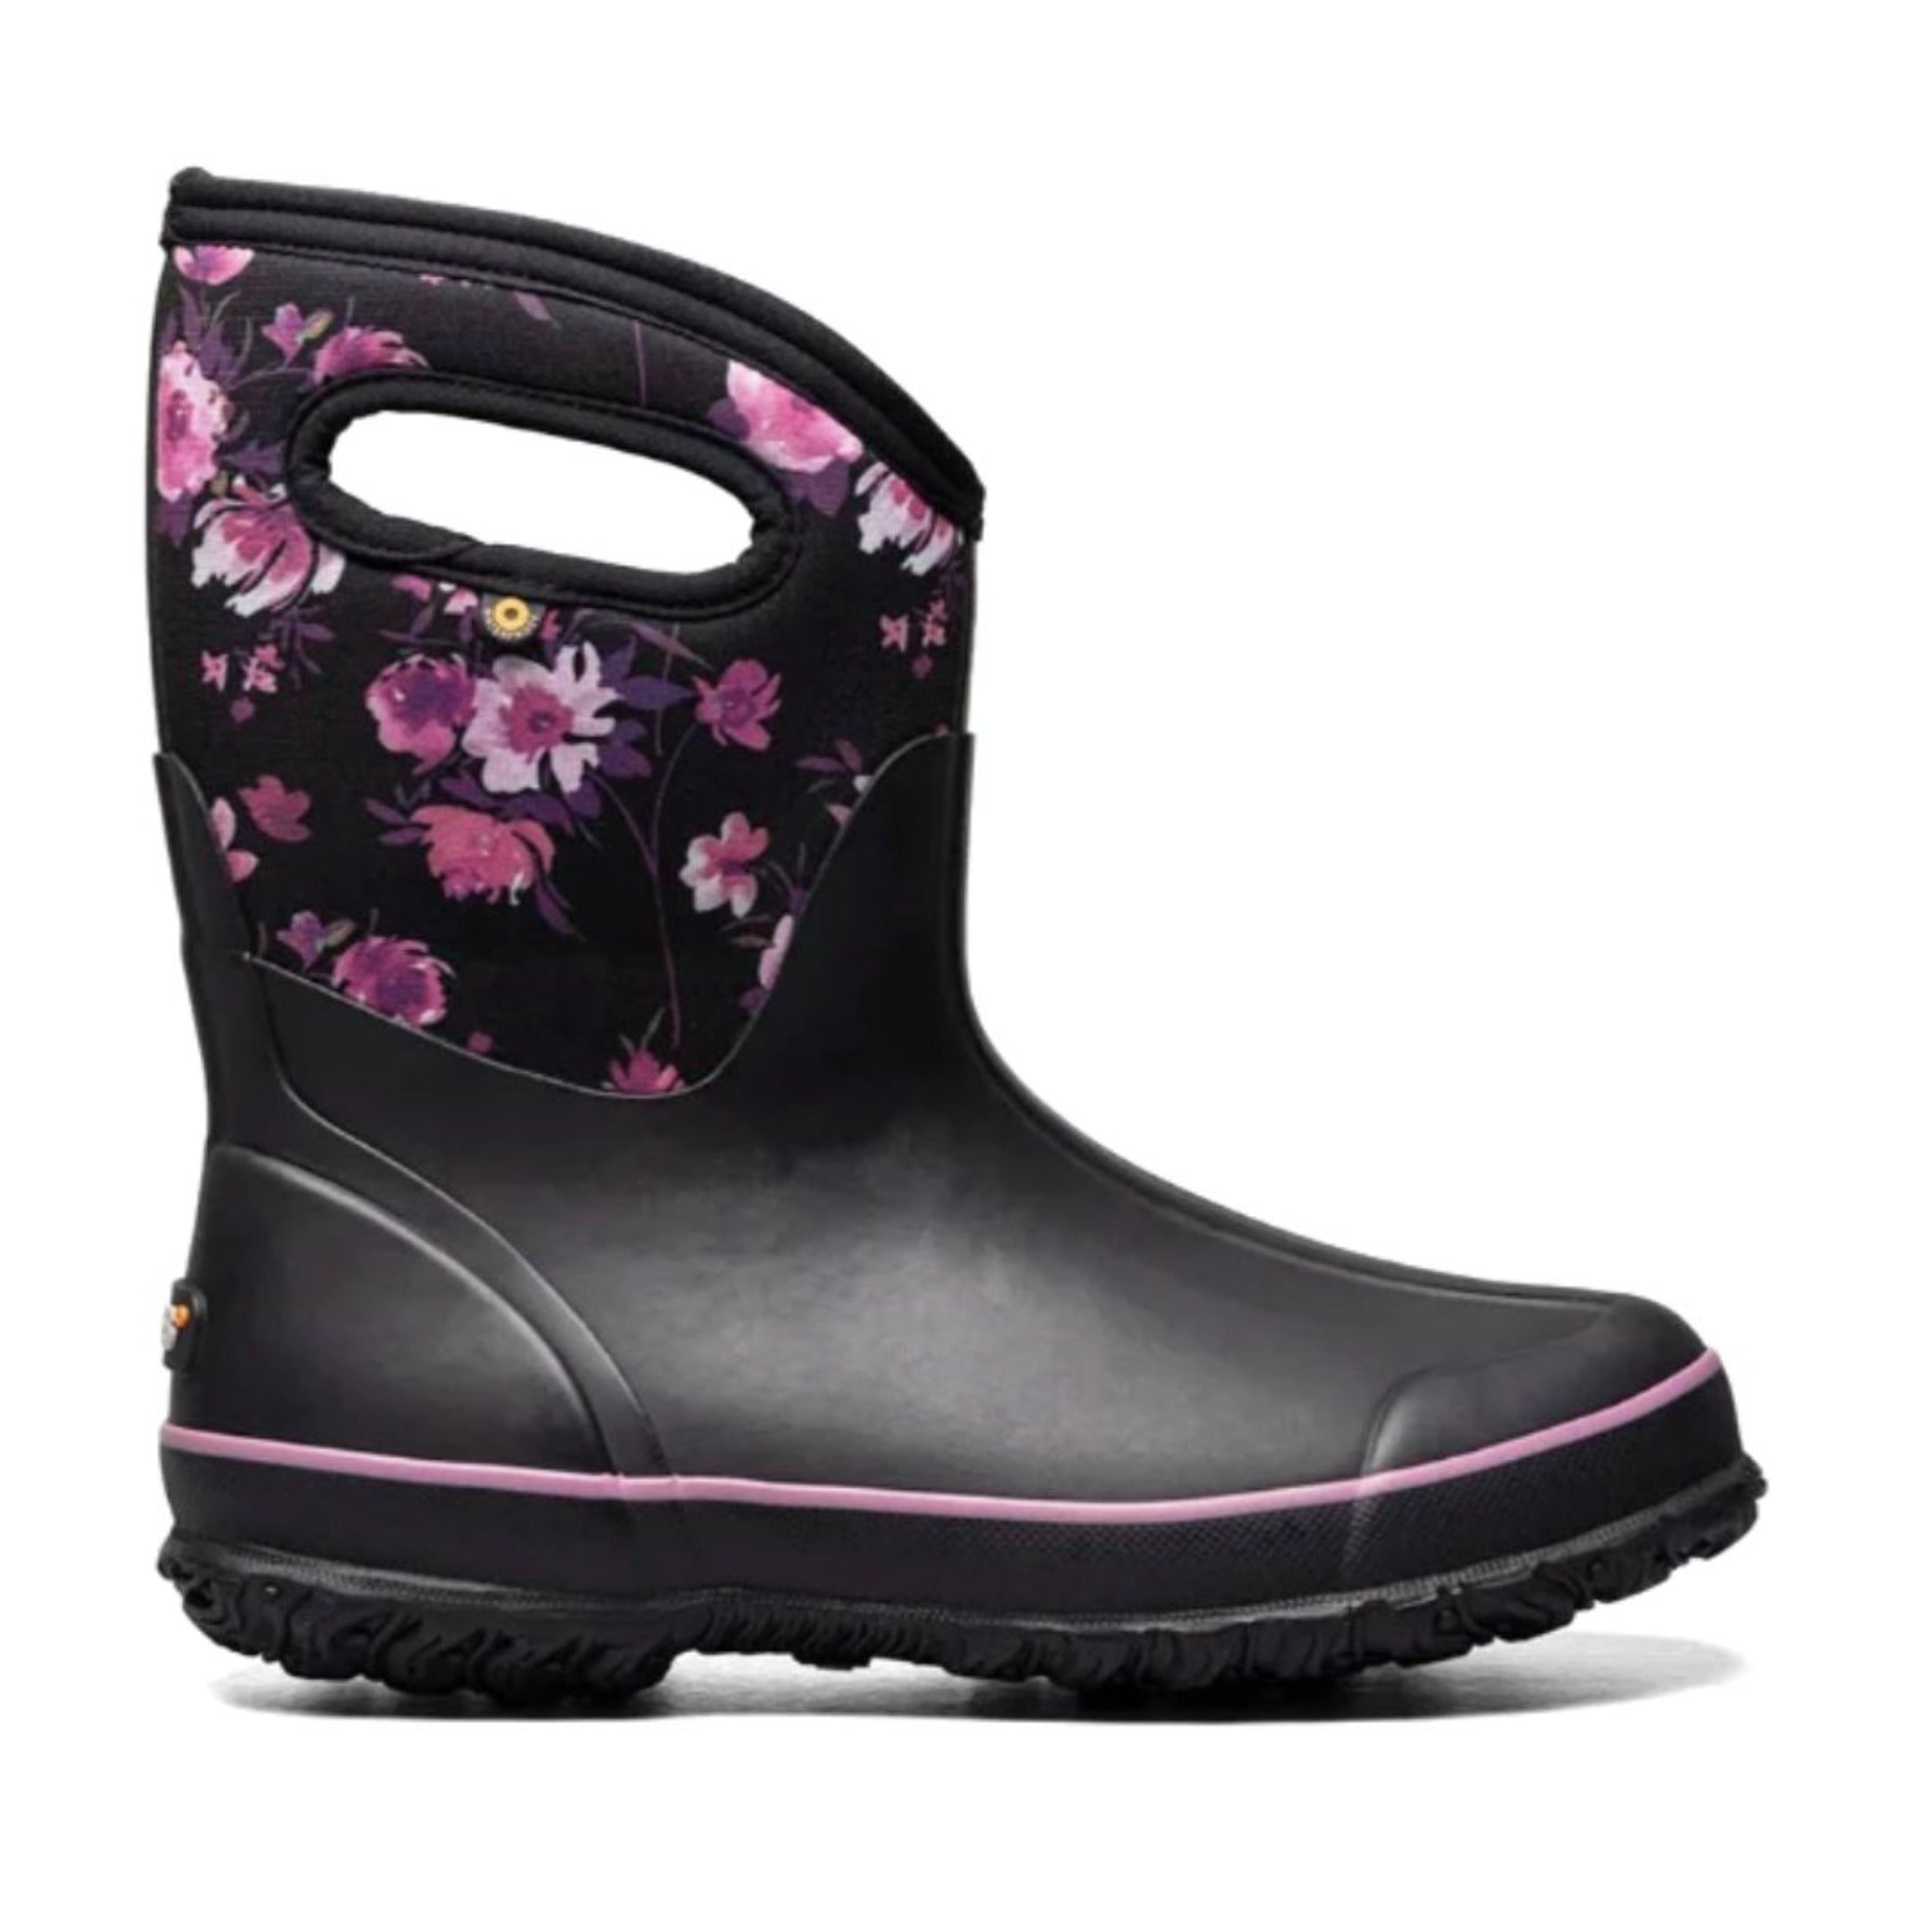 Classic Mid Painterly Waterproof Slip On Snow Boots